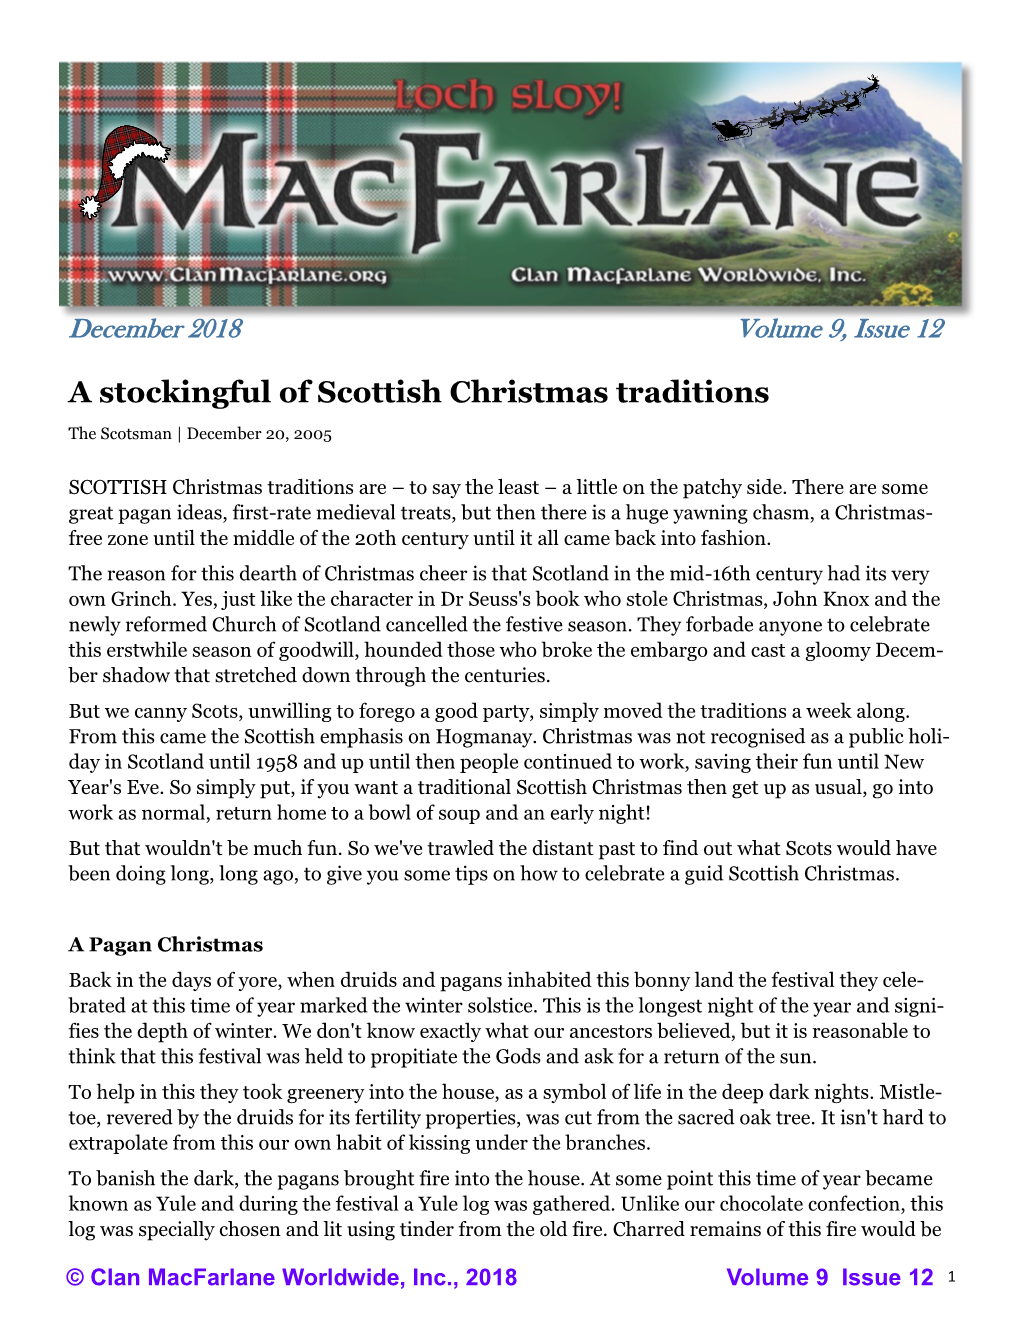 A Stockingful of Scottish Christmas Traditions